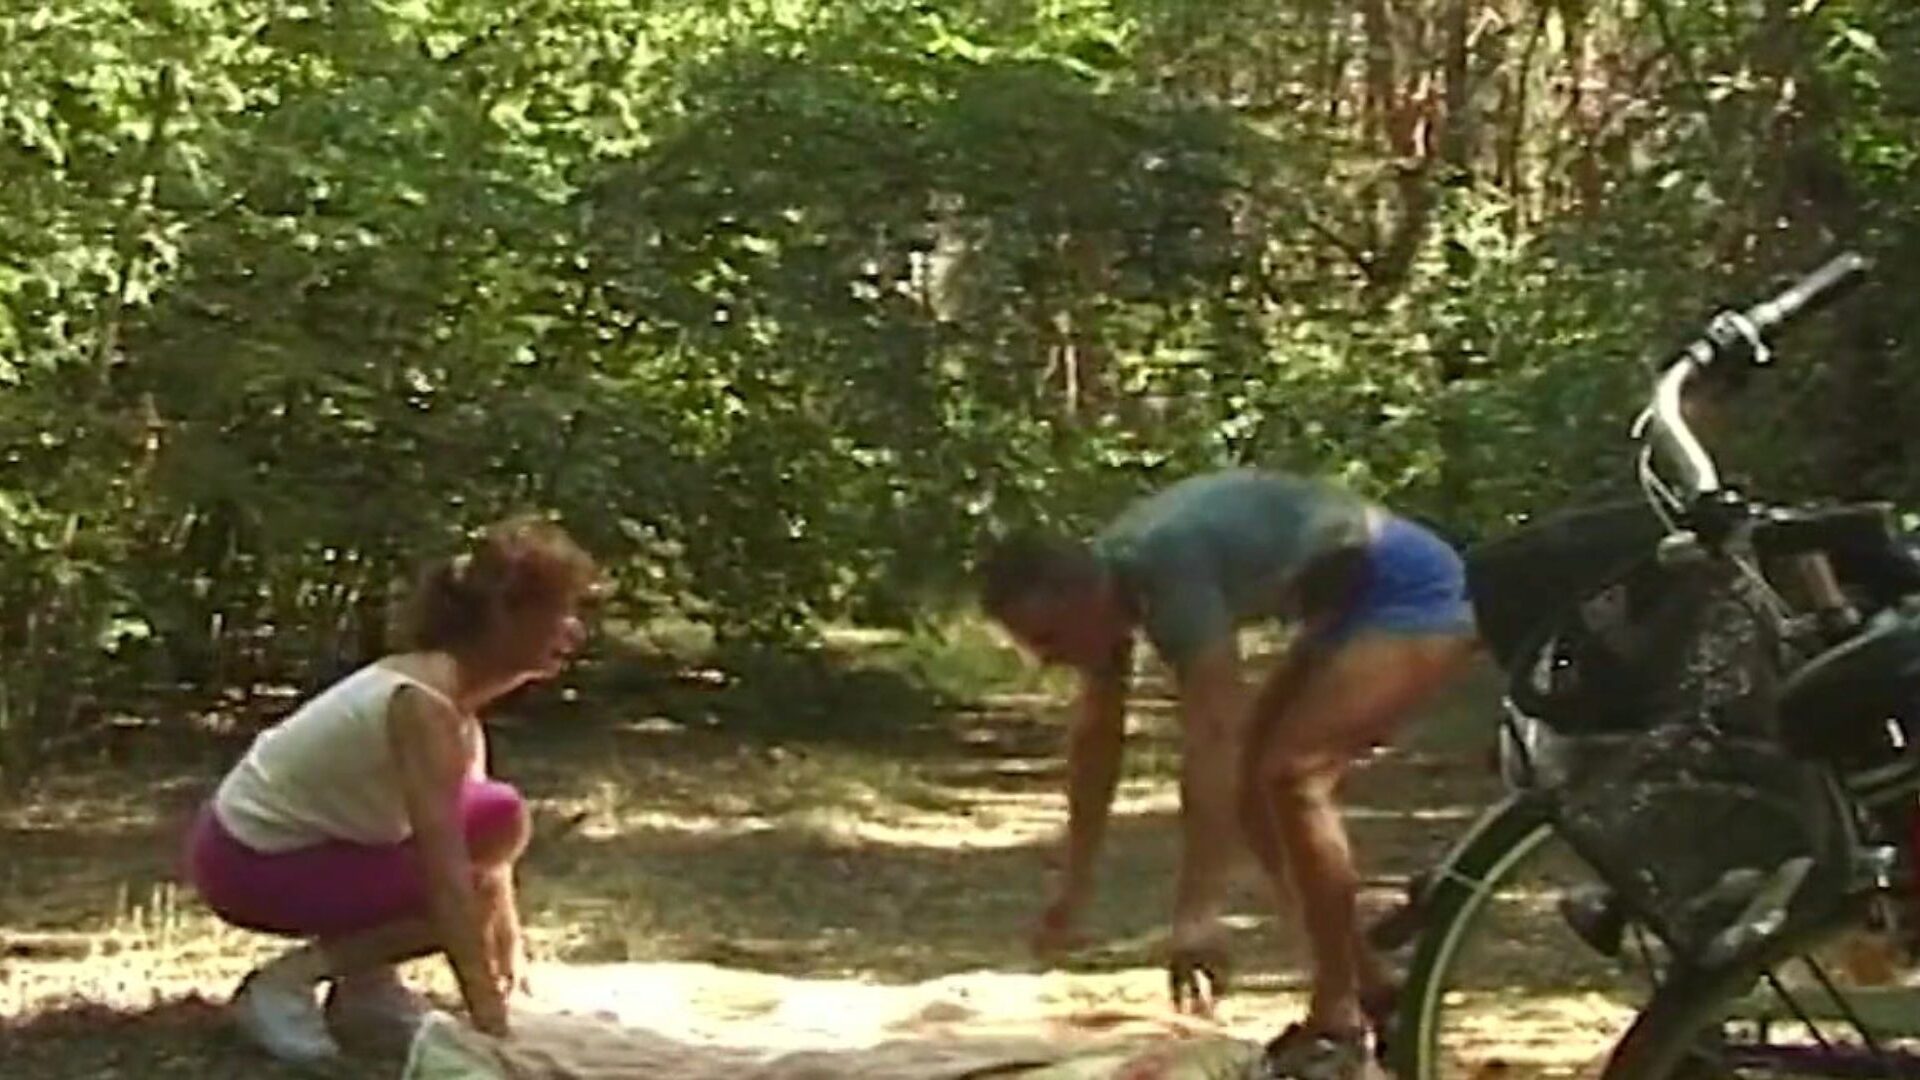 Bike Tour with 71 Year Old Mom, Free Mom List HD Porn 04 Watch Bike Tour with 71 Year Old Mom video on xHamster, the giant HD hump tube site with tons of free German Mom List & Mom Dvd porno clips